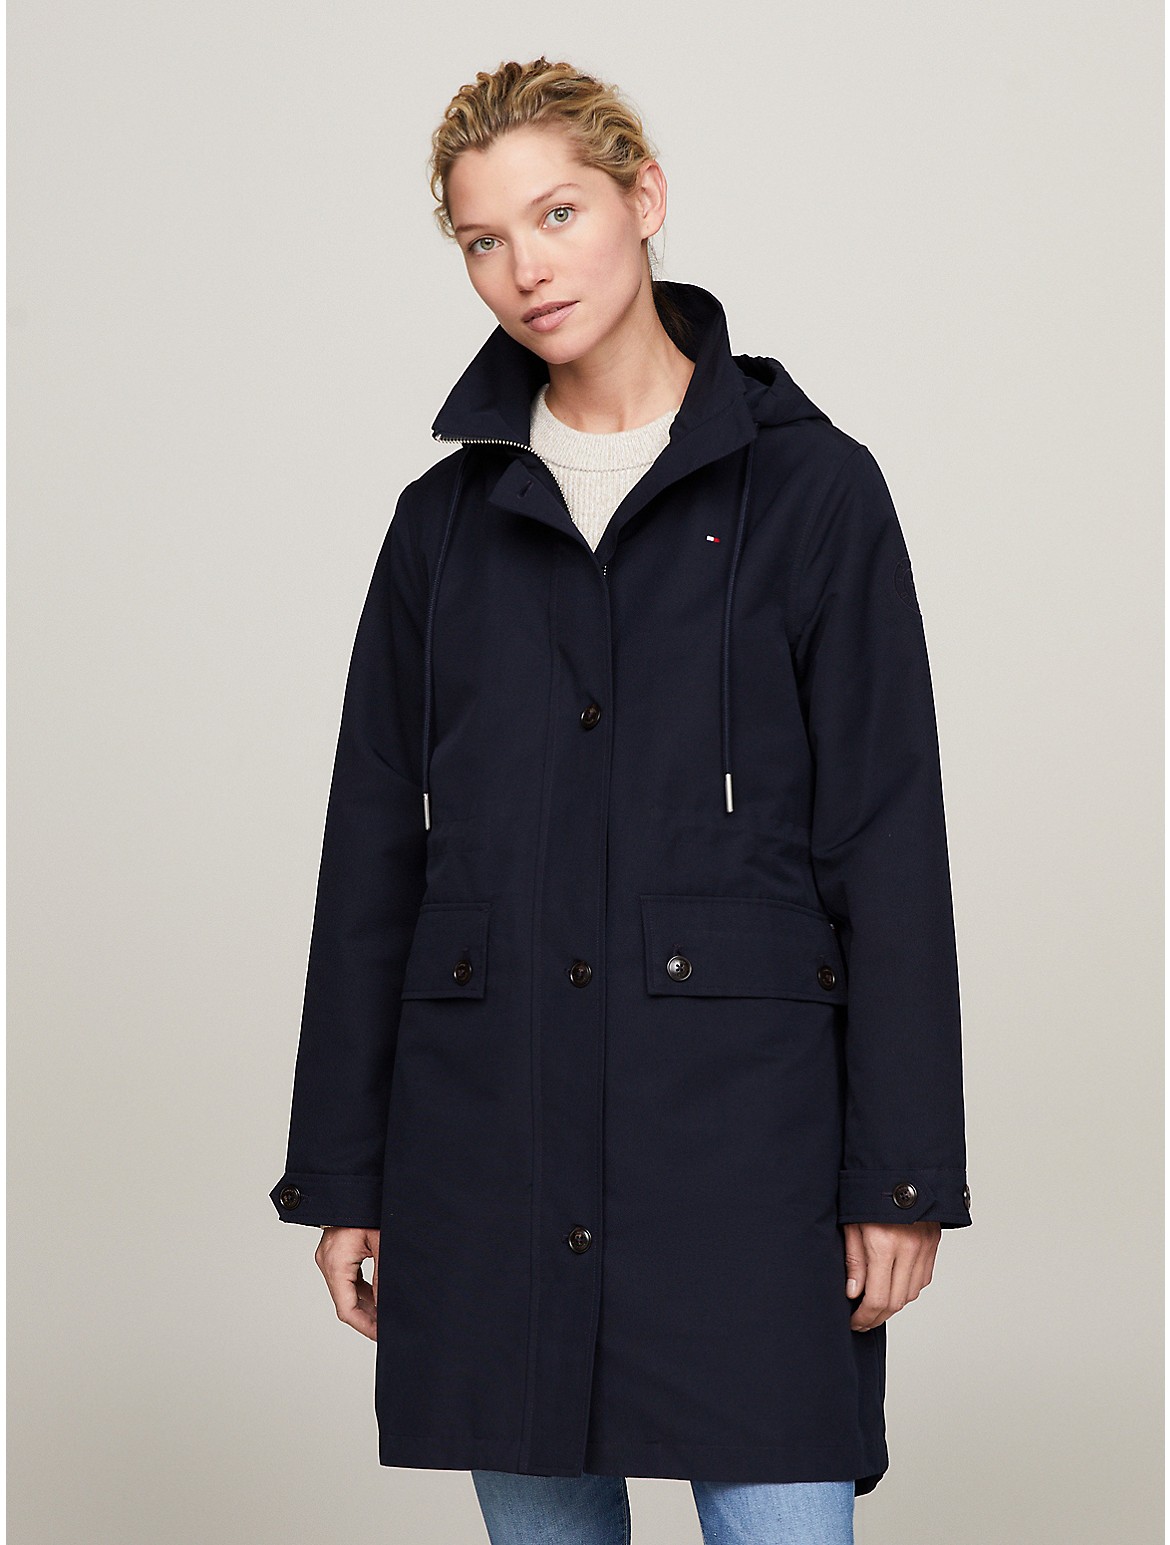 Tommy Hilfiger Women's Essential Relaxed Water-Repellant Parka